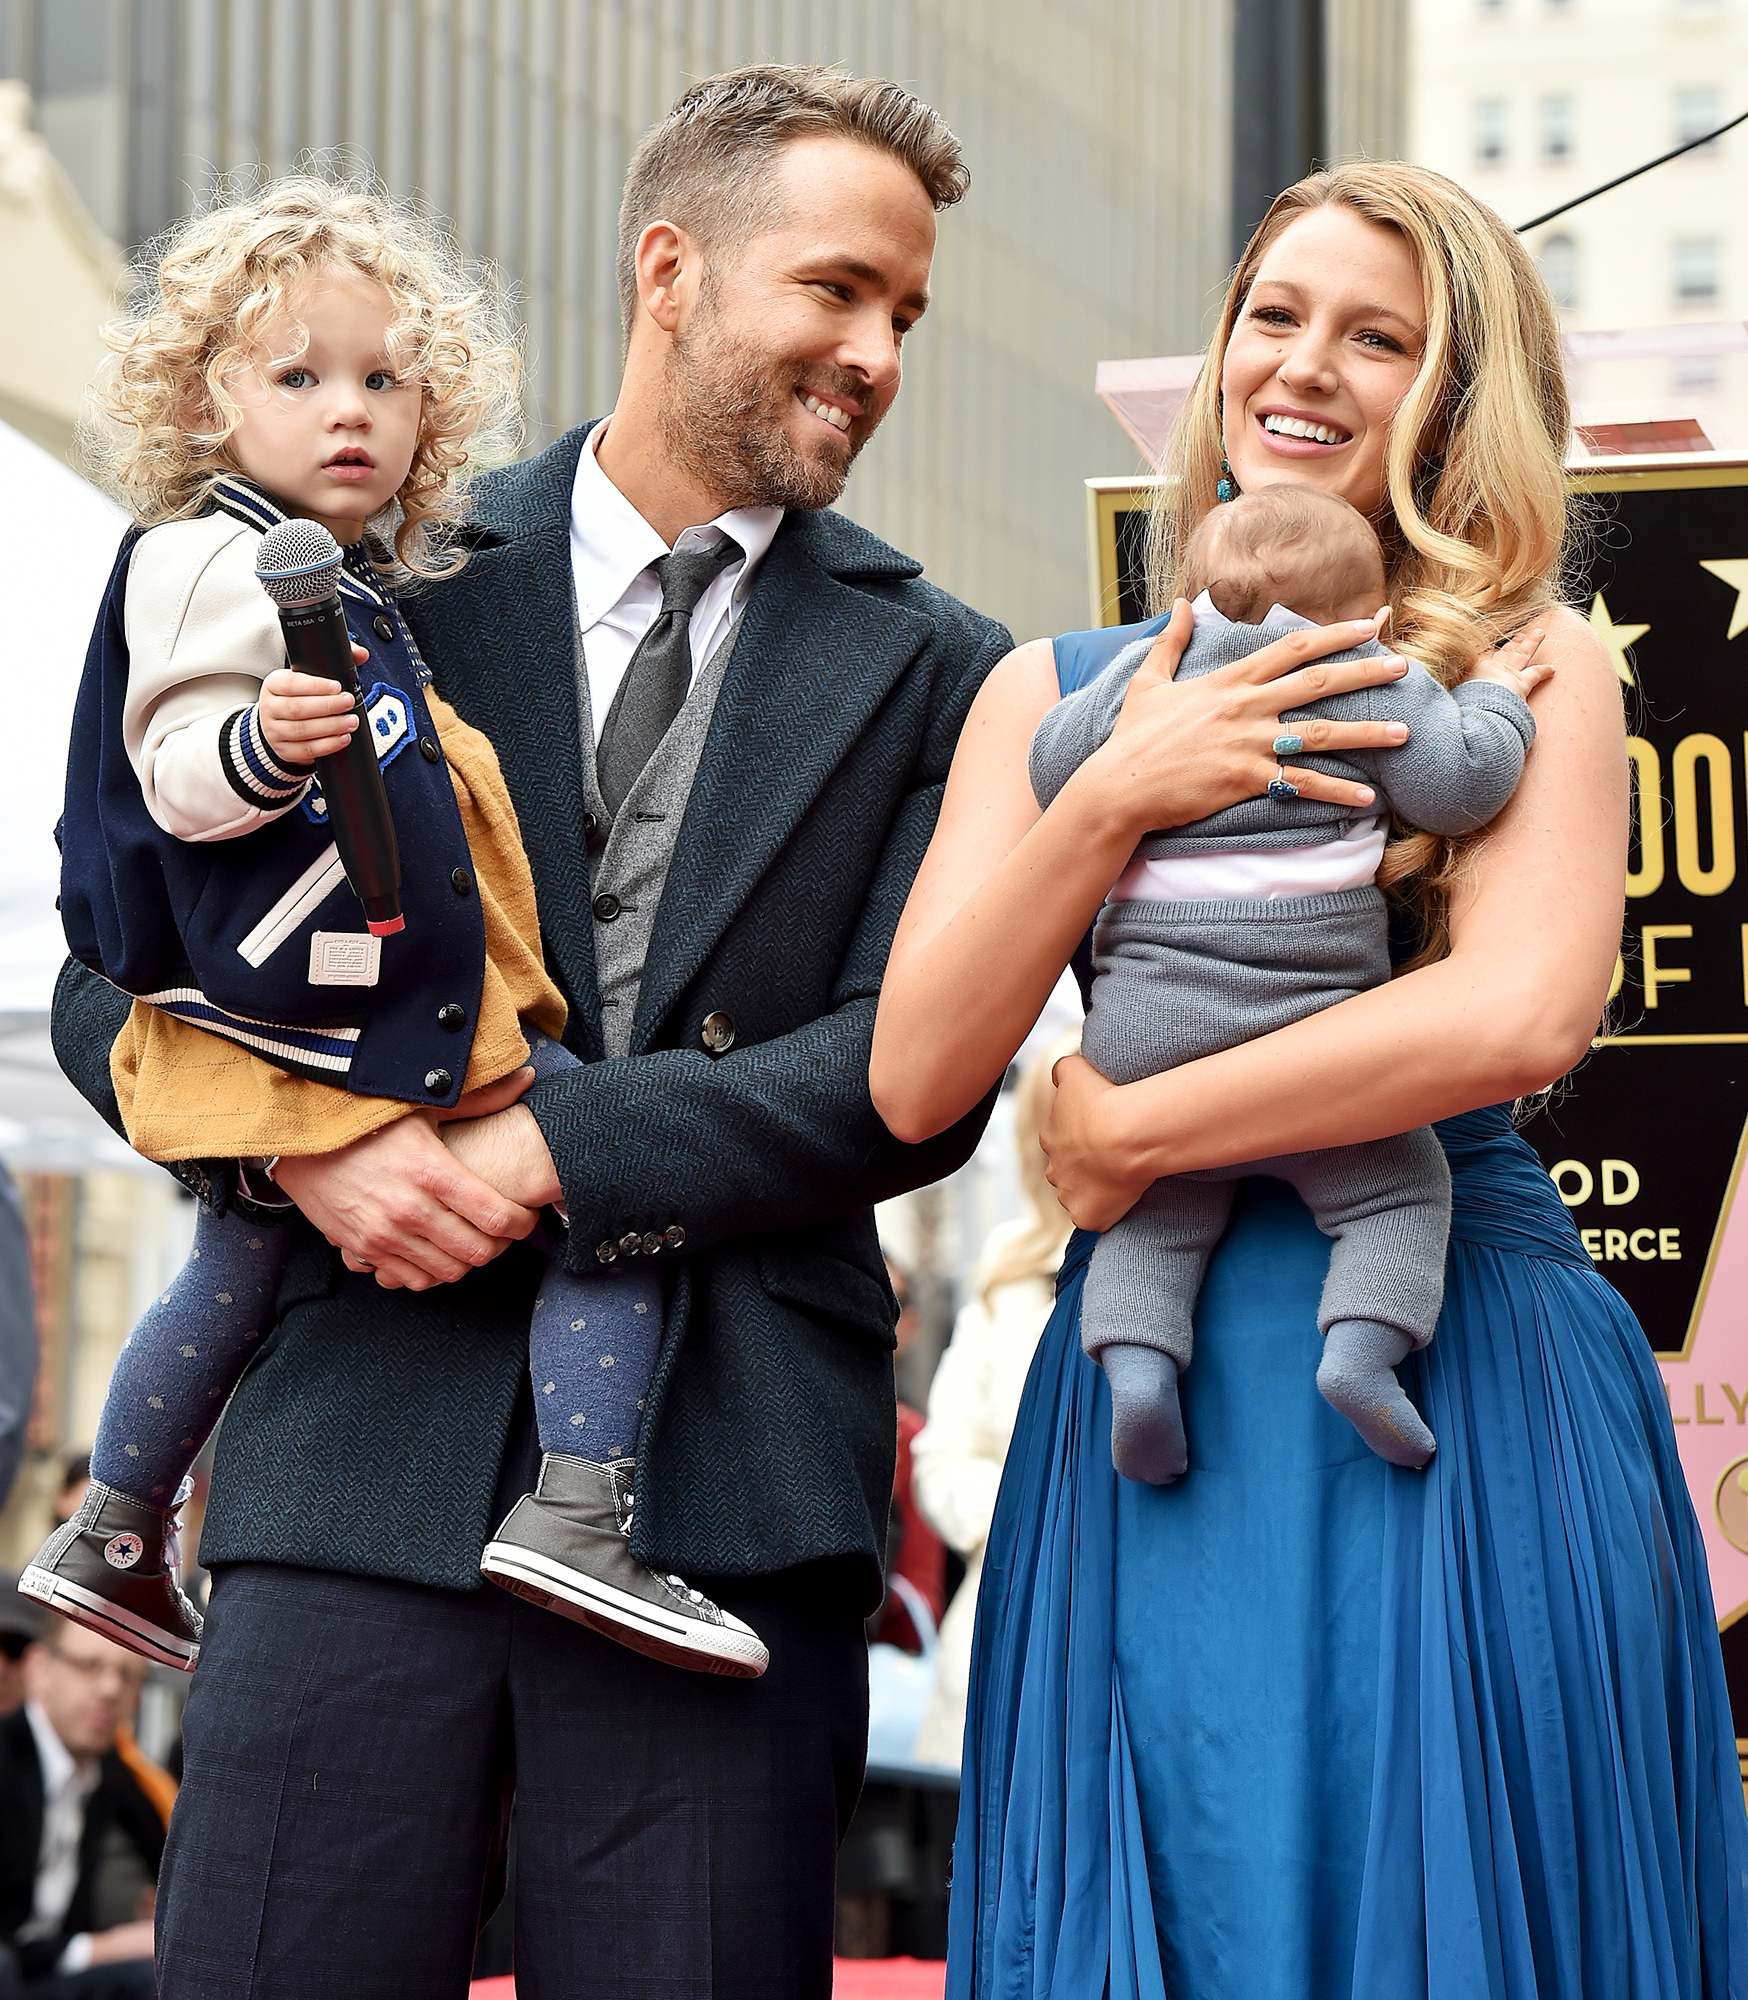 https://www.usmagazine.com/wp-content/uploads/2019/04/Blake-Lively-Ryan-Reynolds-quotes-about-daughters.jpg?quality=40&strip=all